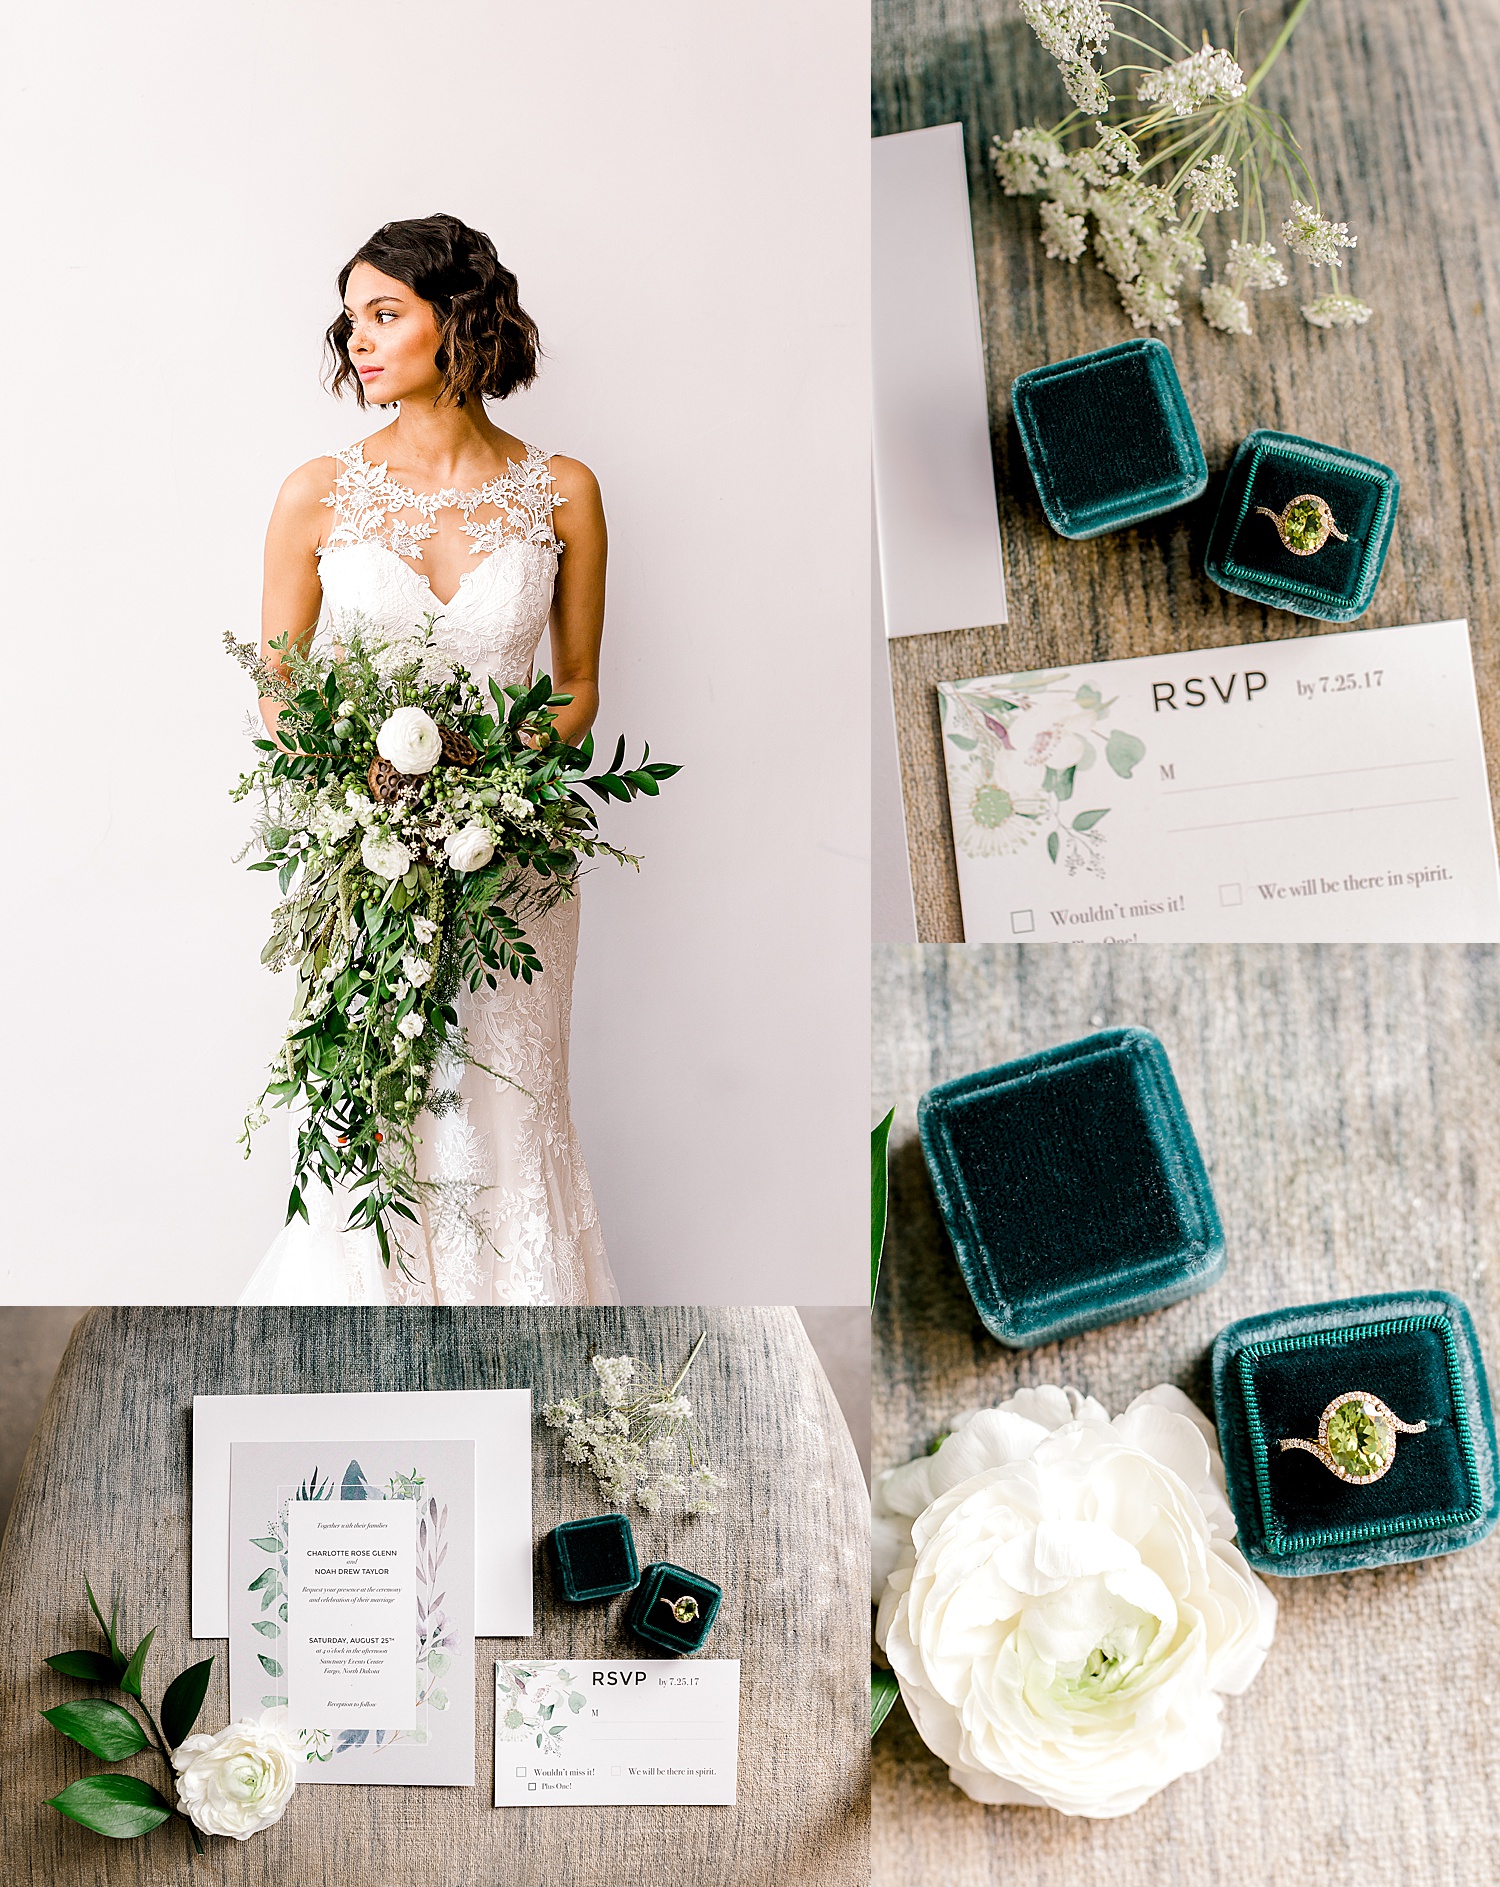 green ring boxes holding diamond bands and flatly stationary by Midwest wedding photographer